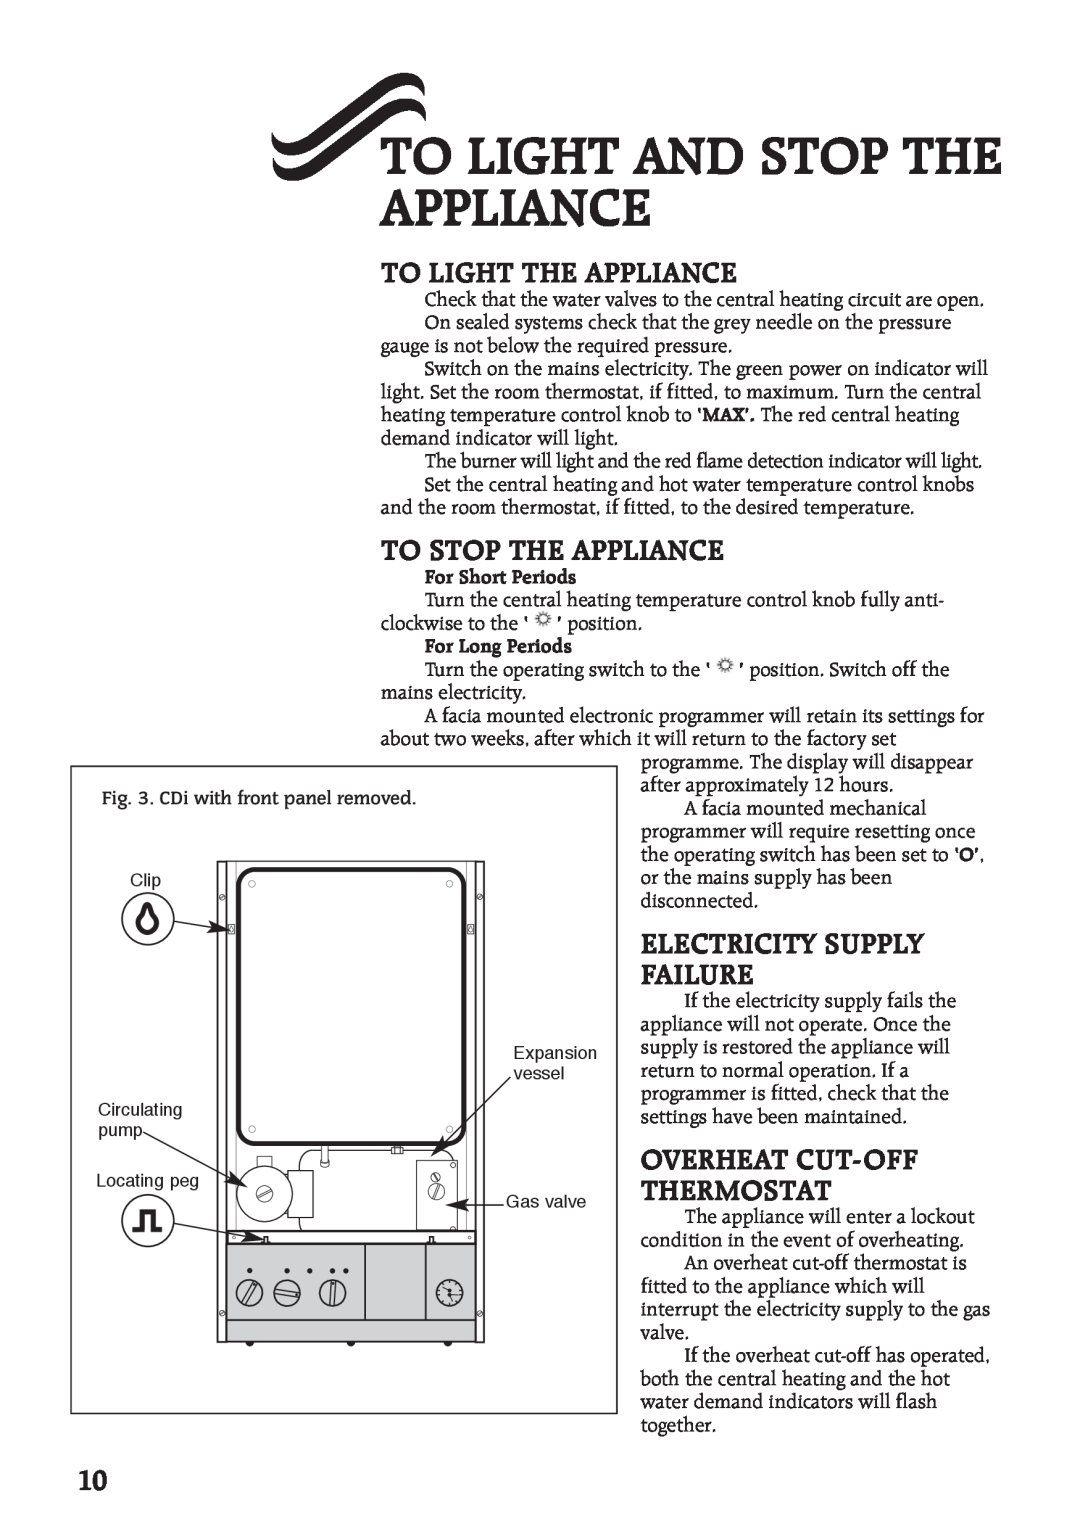 Bosch Appliances 28CDI To Light And Stop The Appliance, To Light The Appliance, To Stop The Appliance, Failure, Thermostat 